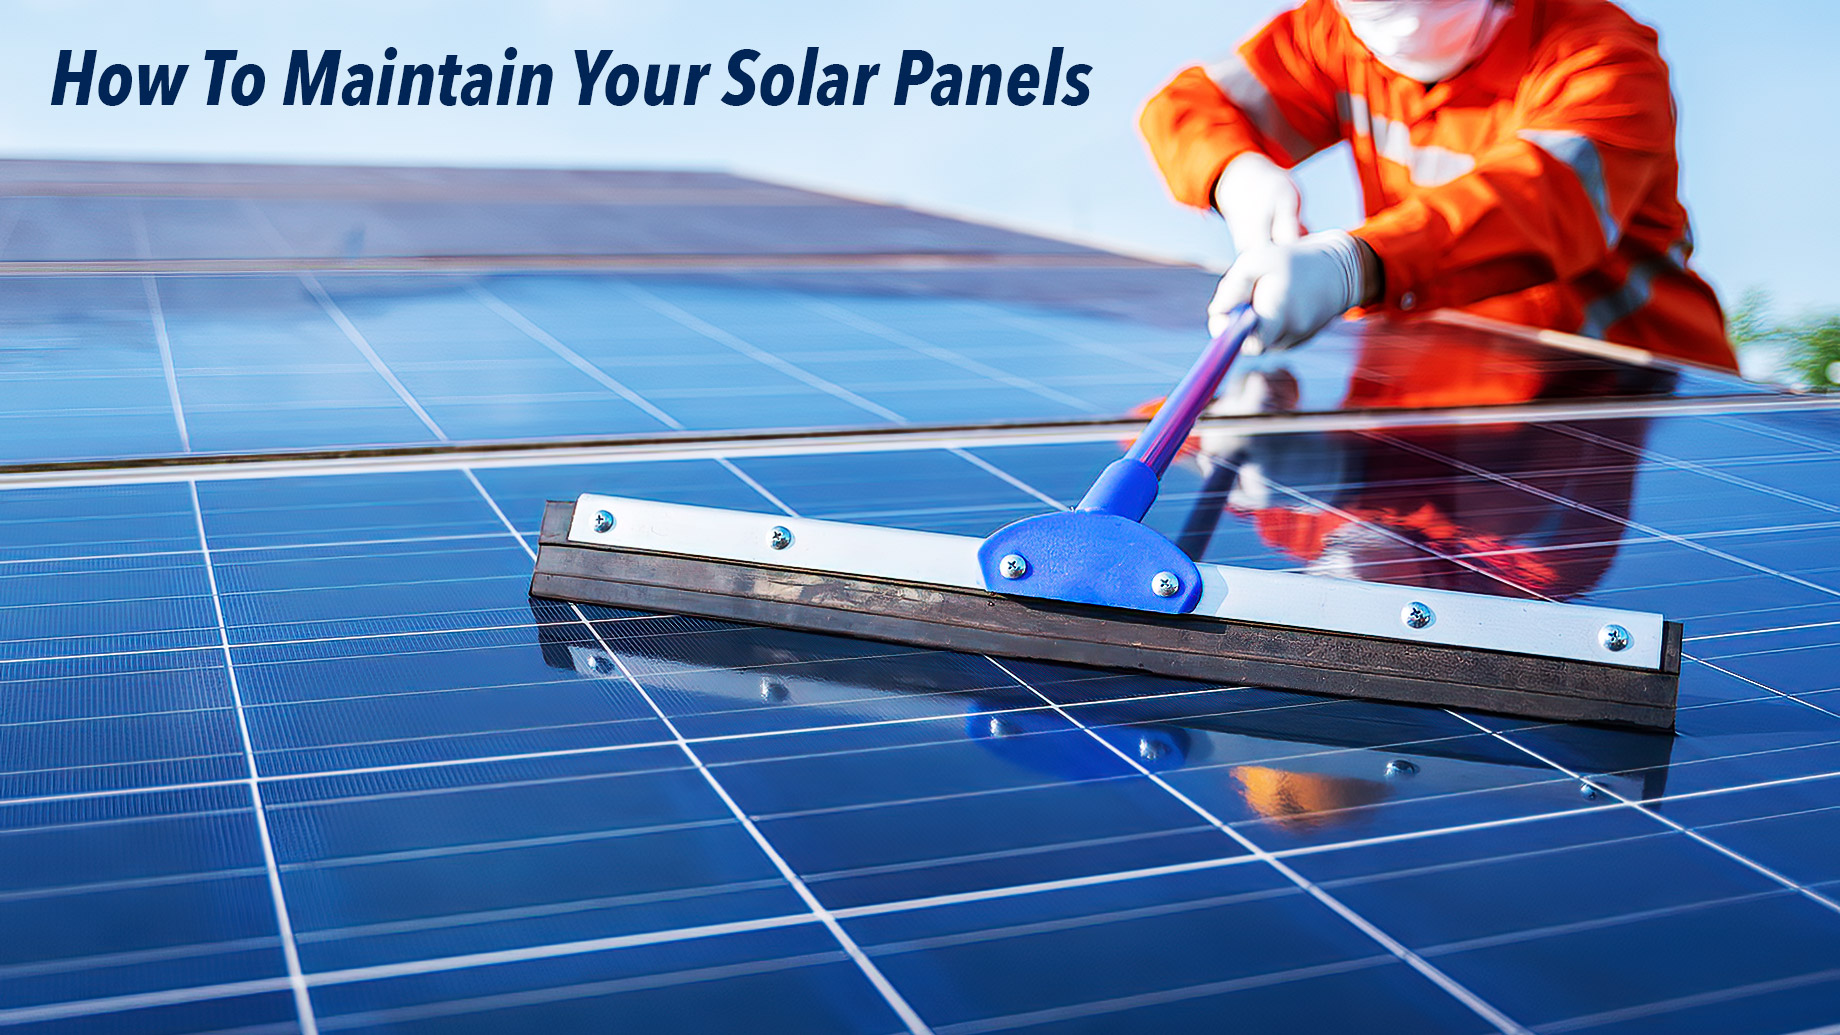 How To Maintain Your Solar Panels